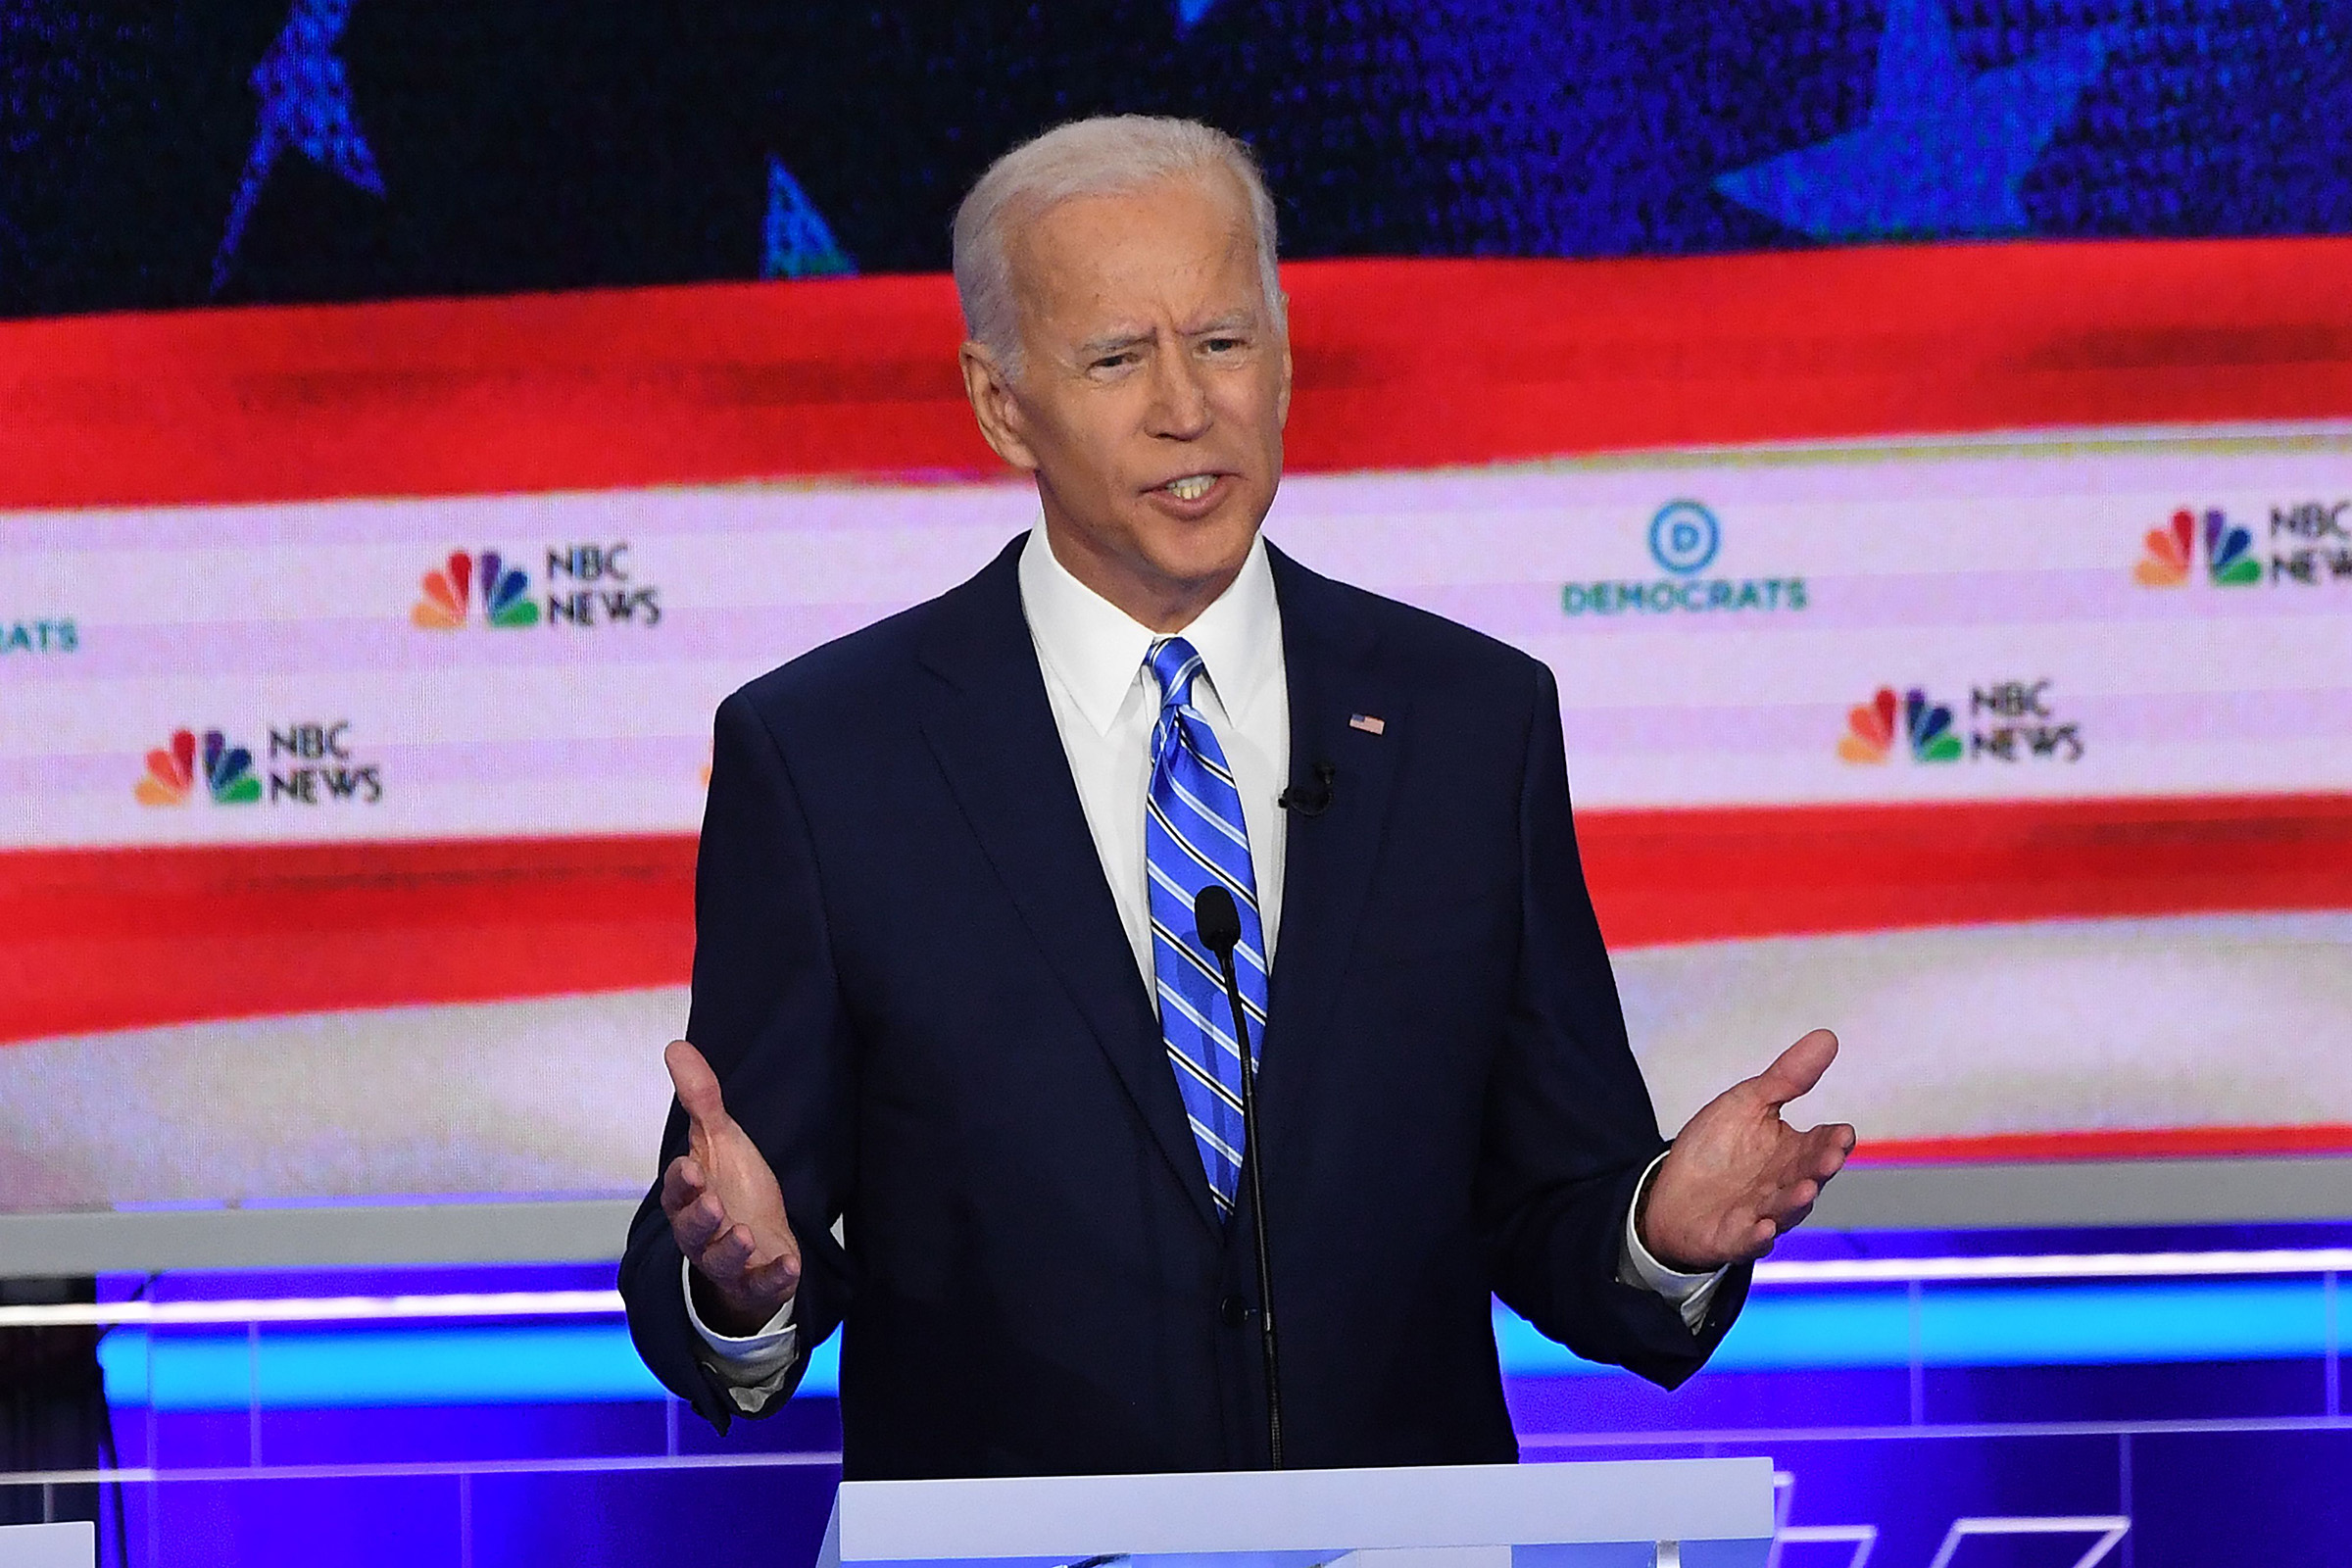 emocratic presidential hopeful former US Vice President Joseph R. Biden speaks during the second Democratic primary debate of the 2020 presidential campaign season hosted by NBC News at the Adrienne Arsht Center for the Performing Arts in Miami, Florida, June 27, 2019. (Saul Loeb—FP/Getty Images D)